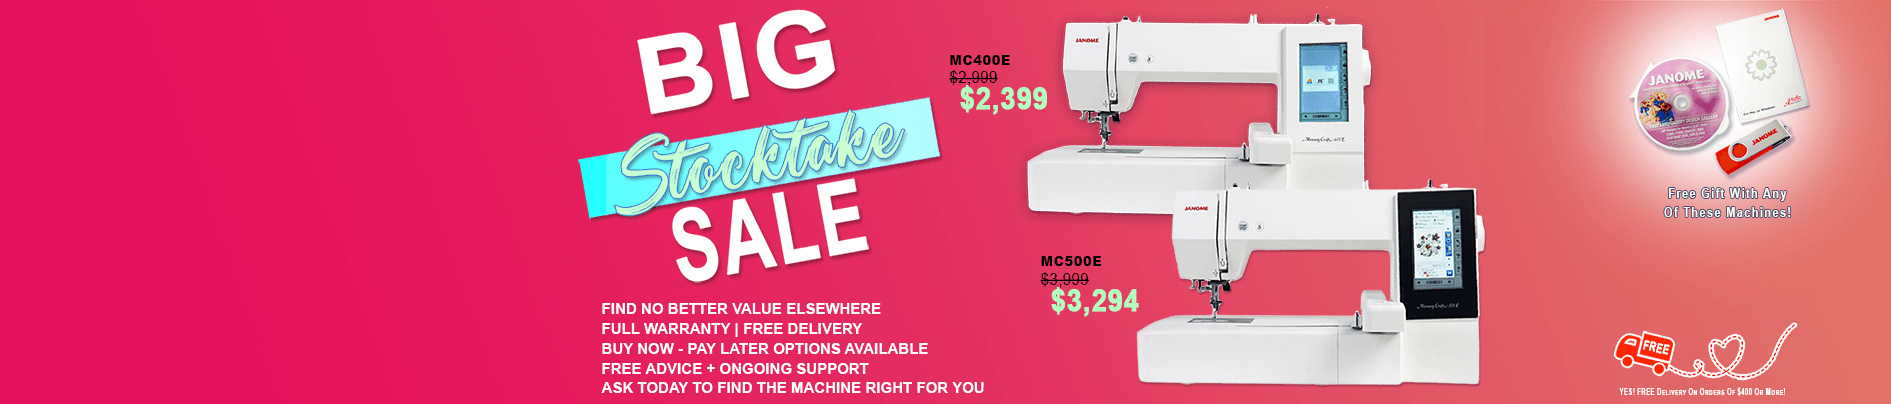 Janome Stocktake Sale - All Embroidery Machines Reduced